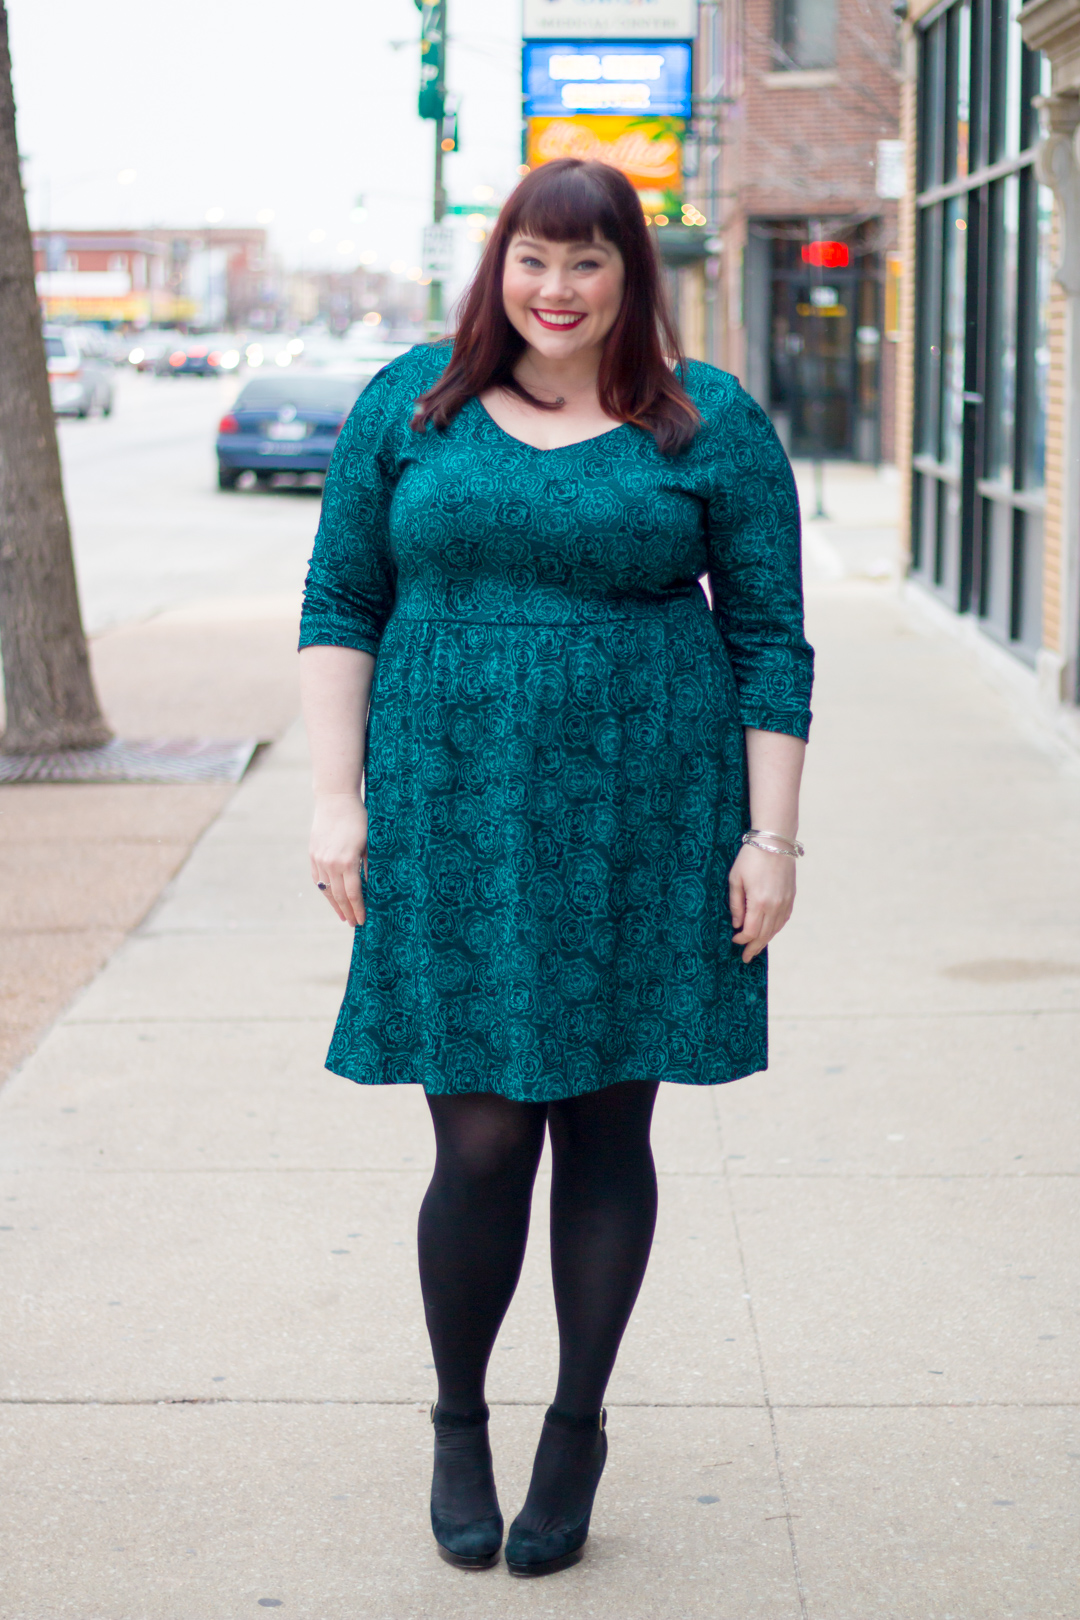 Plus Size Blogger Amber from Style Plus Curves in a Melissa Masse Dress from Gwynnie Bee